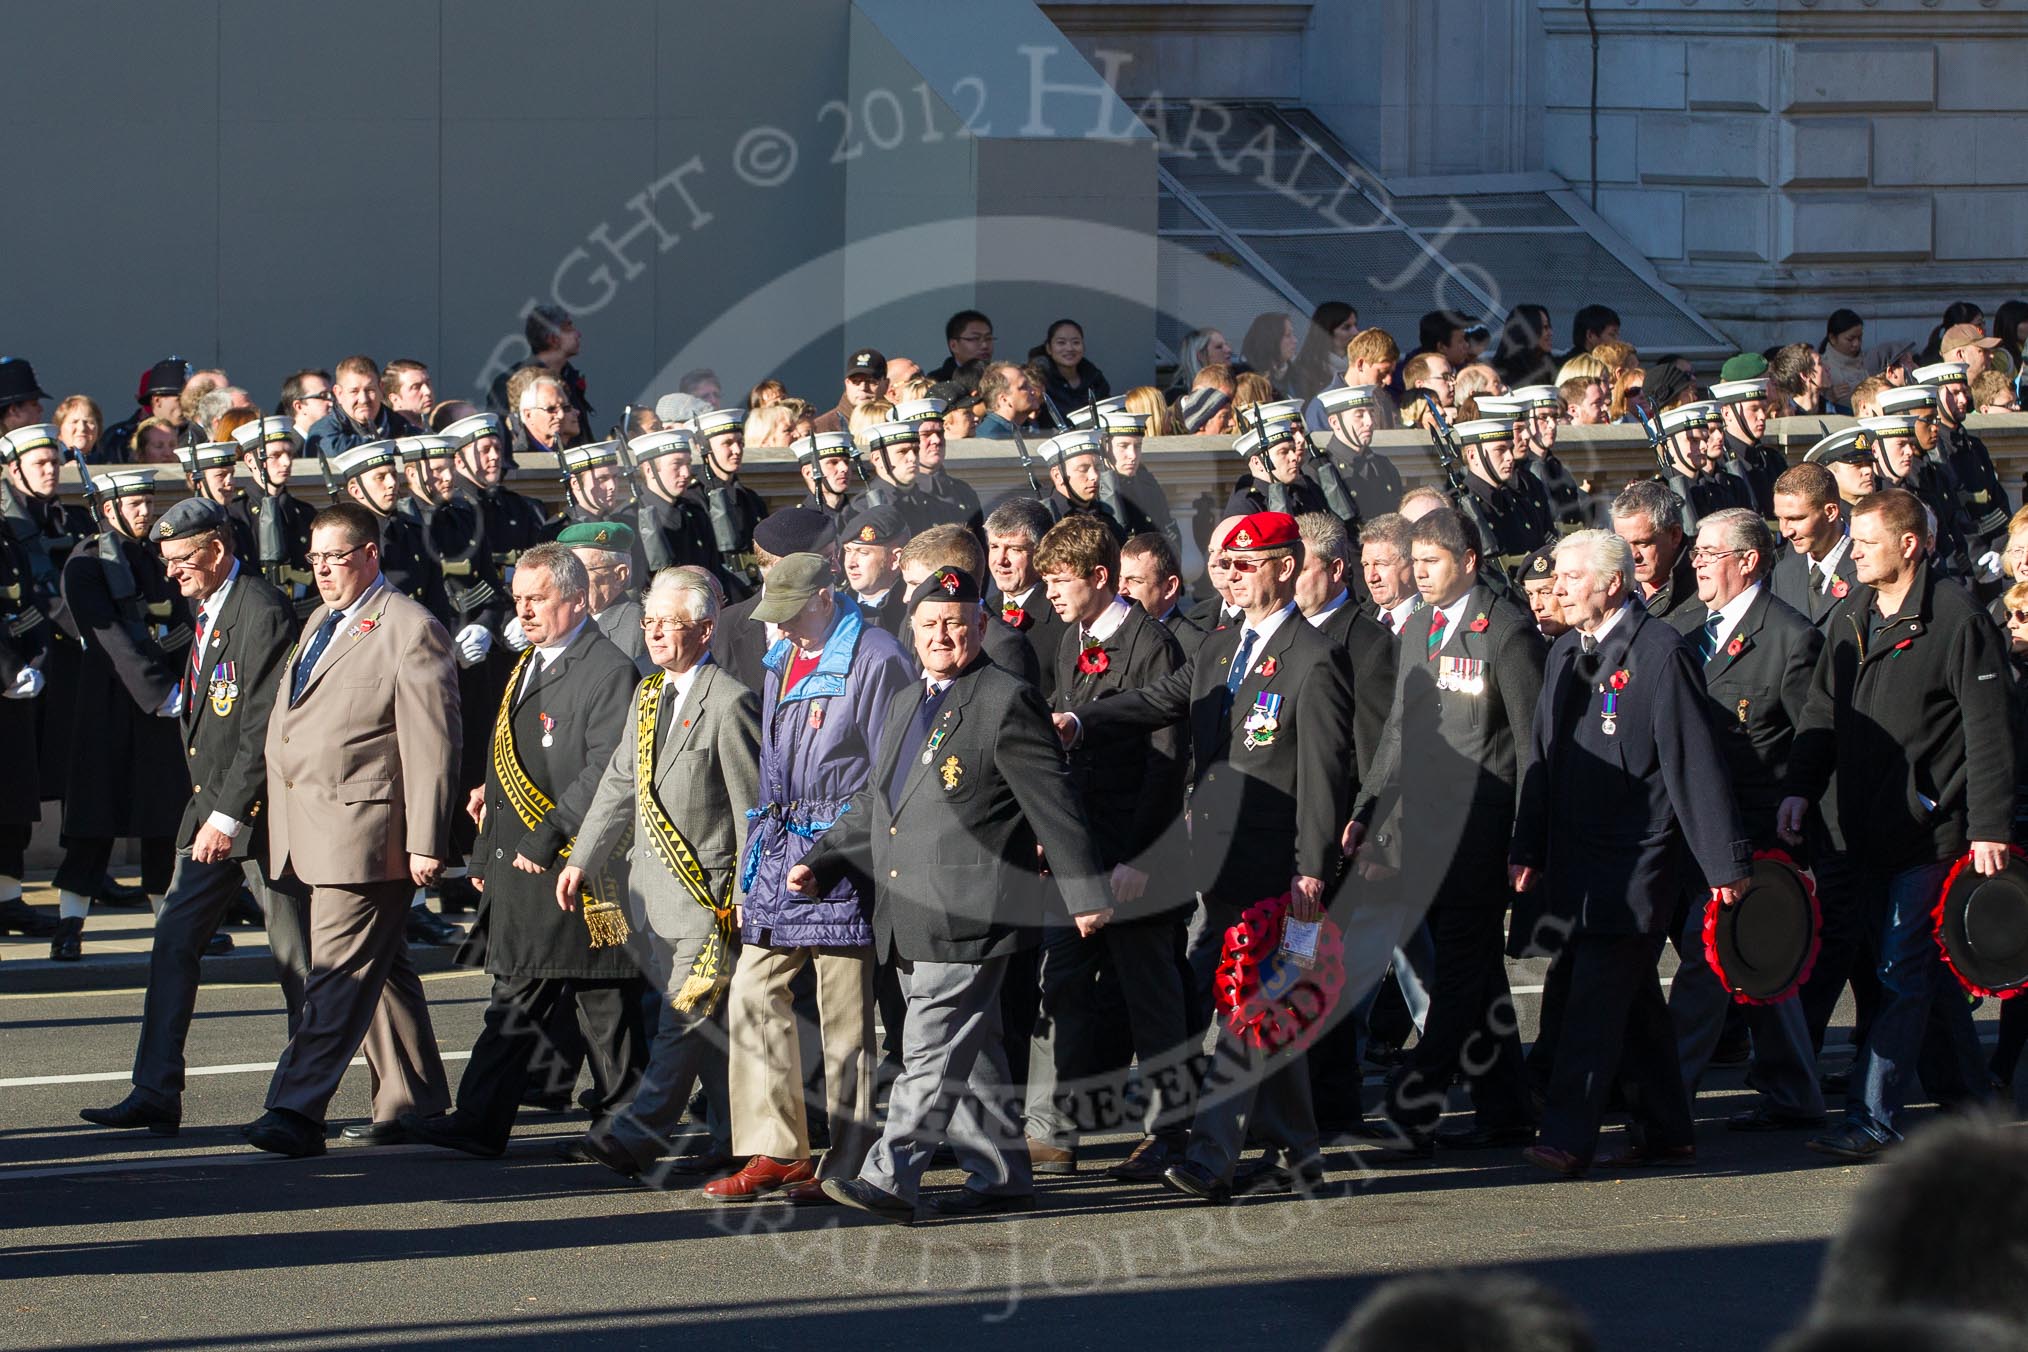 Remembrance Sunday 2012 Cenotaph March Past: Group F15 - National Gulf Veterans & Families Association..
Whitehall, Cenotaph,
London SW1,

United Kingdom,
on 11 November 2012 at 11:47, image #520